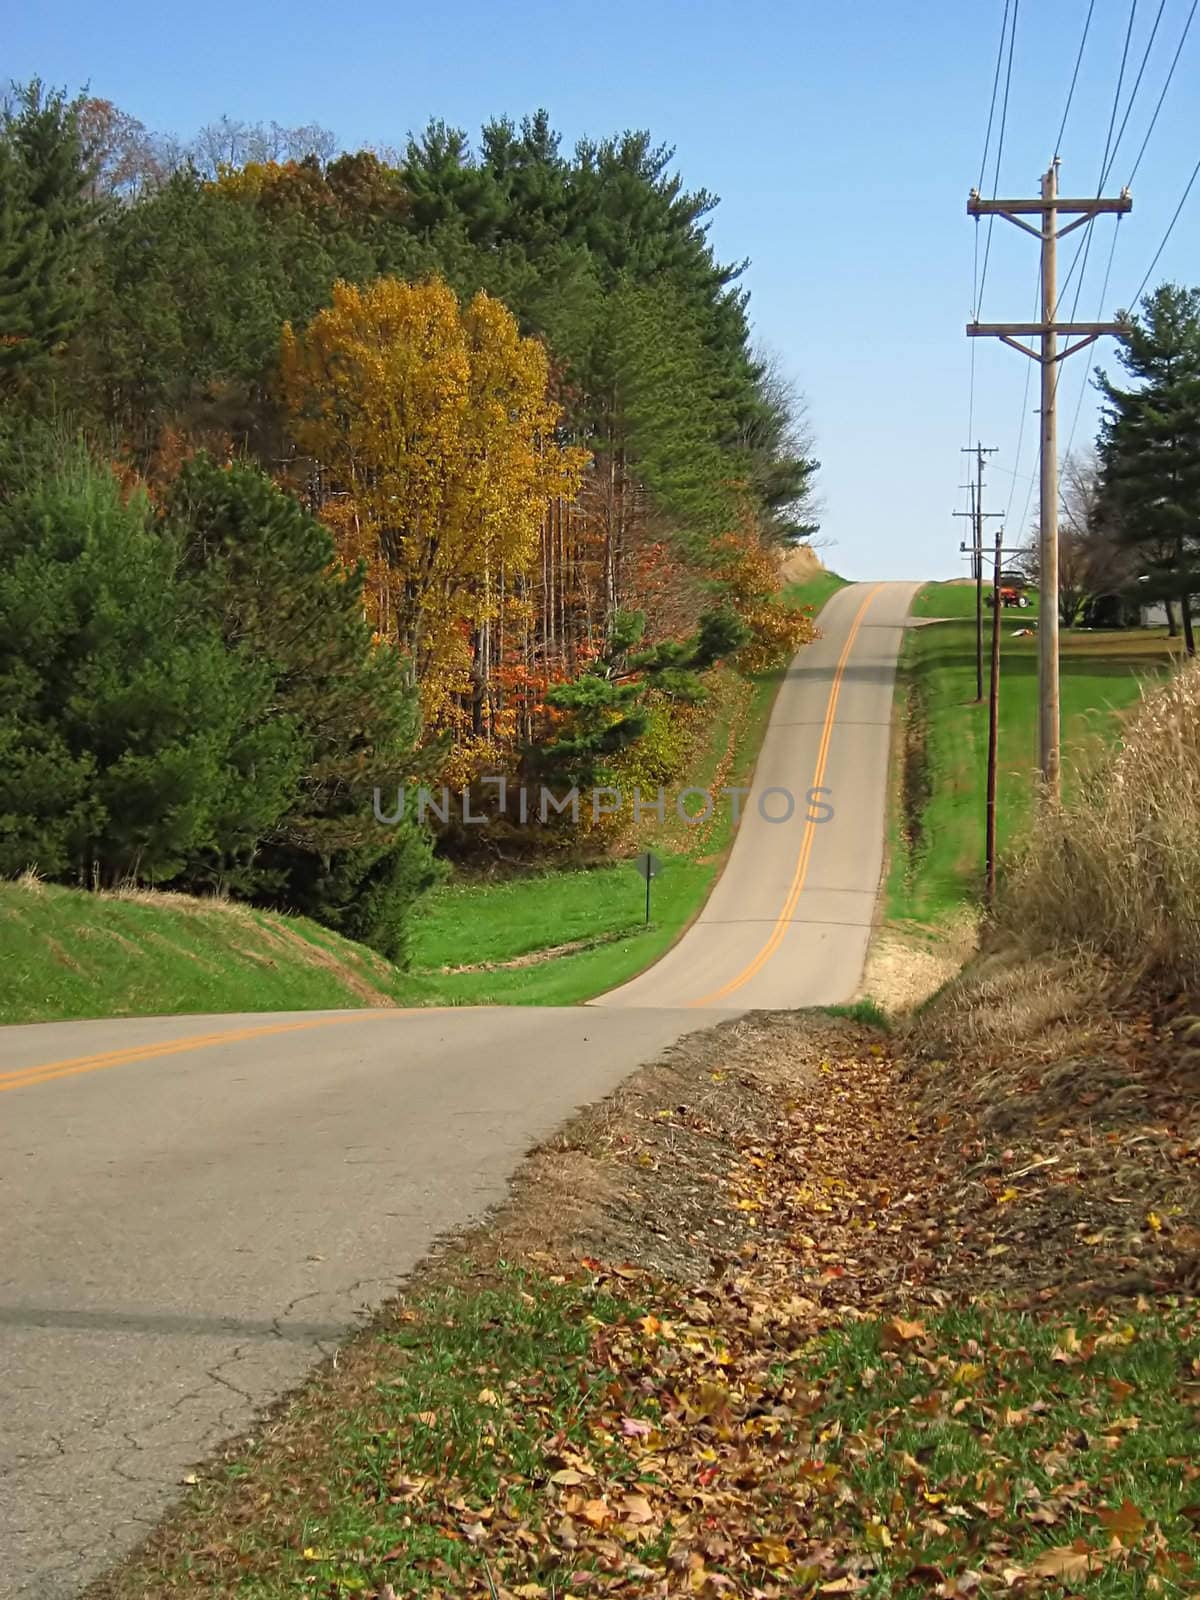 A photograph of a road in autumn.